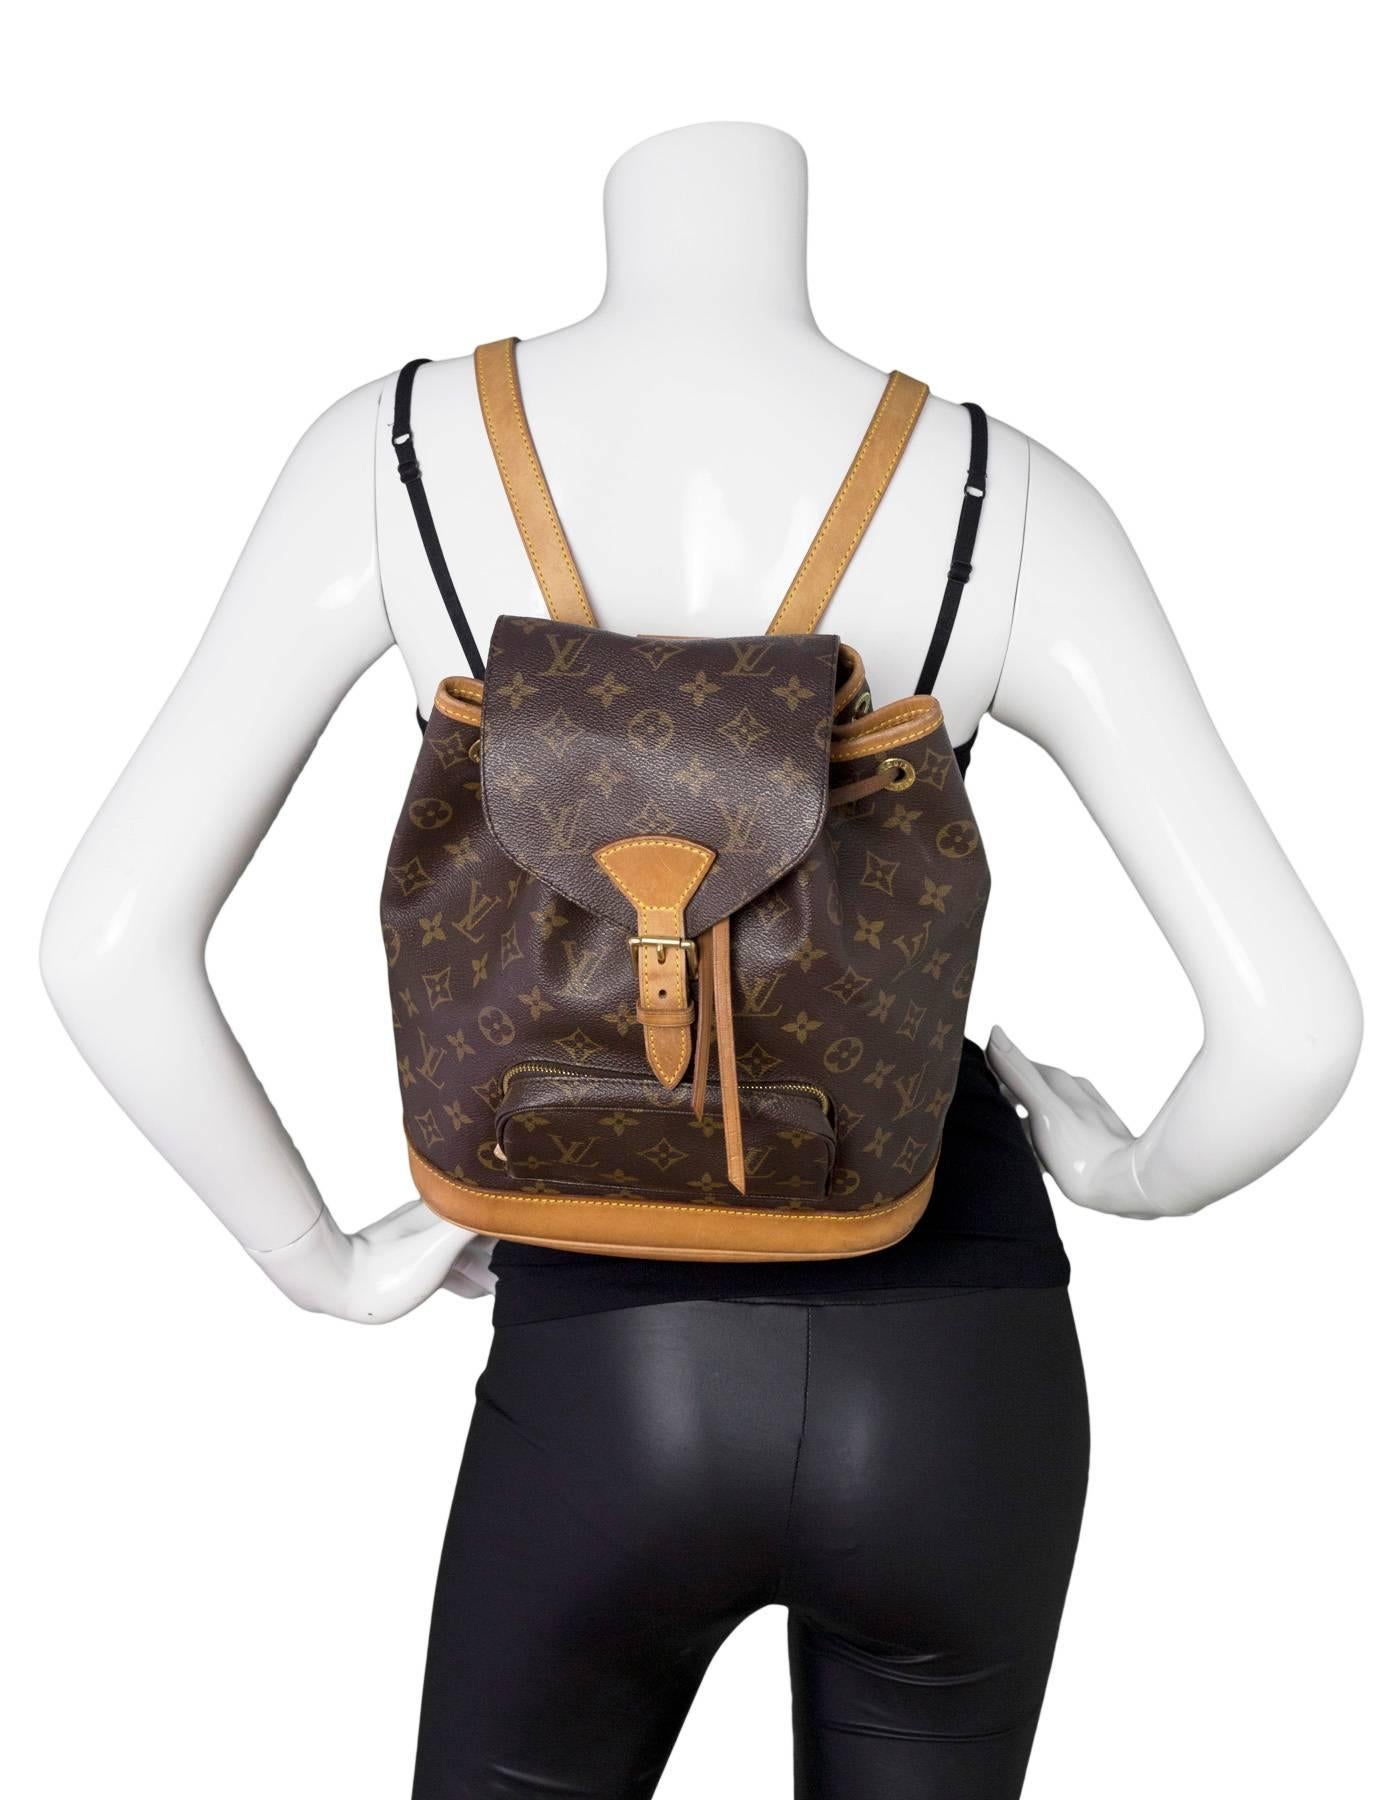 Louis Vuitton Monogram Montsouris MM Backpack
Features leather trim throughout and adjustable shoulder straps

Made In: France
Year of Production: 2000
Color: Brown
Hardware: Goldtone
Materials: Leather and coated canvas
Lining: Brown